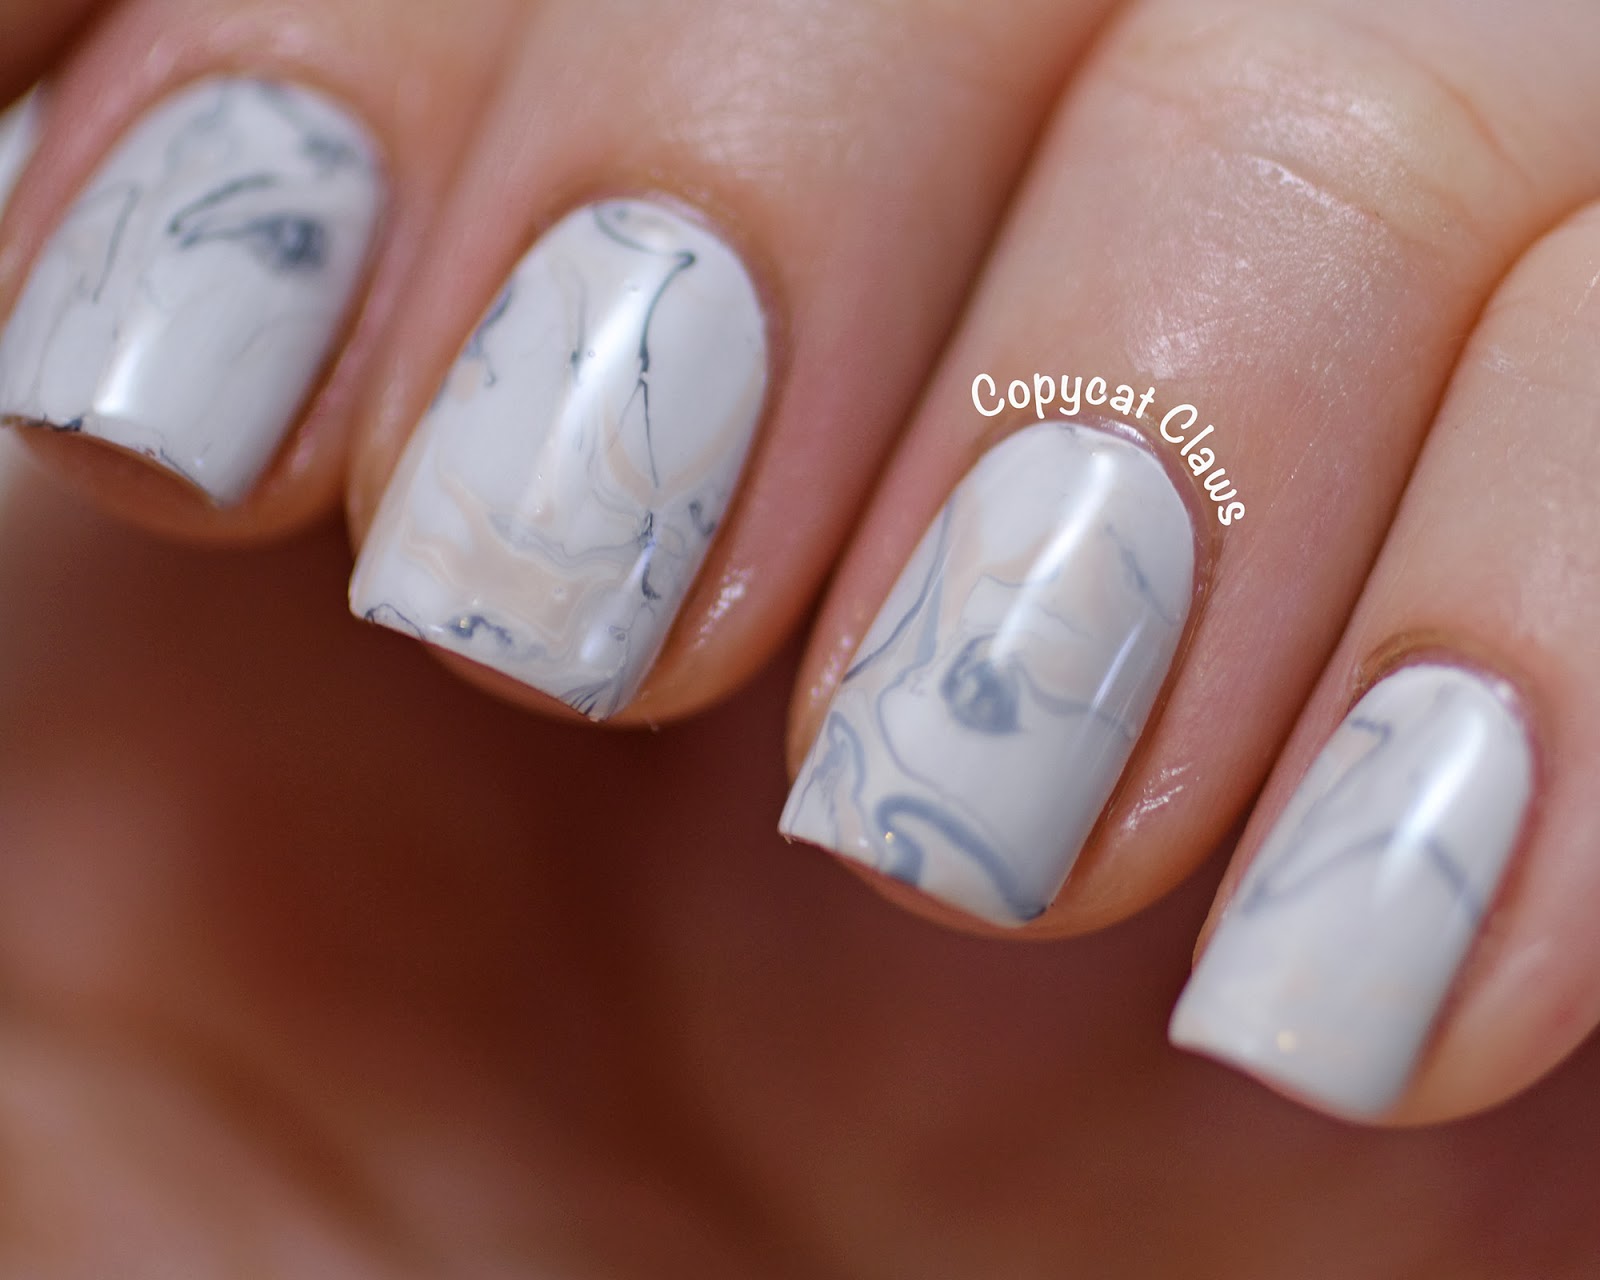 10 Gorgeous Gray Marble Nail Art Designs to Try - wide 9